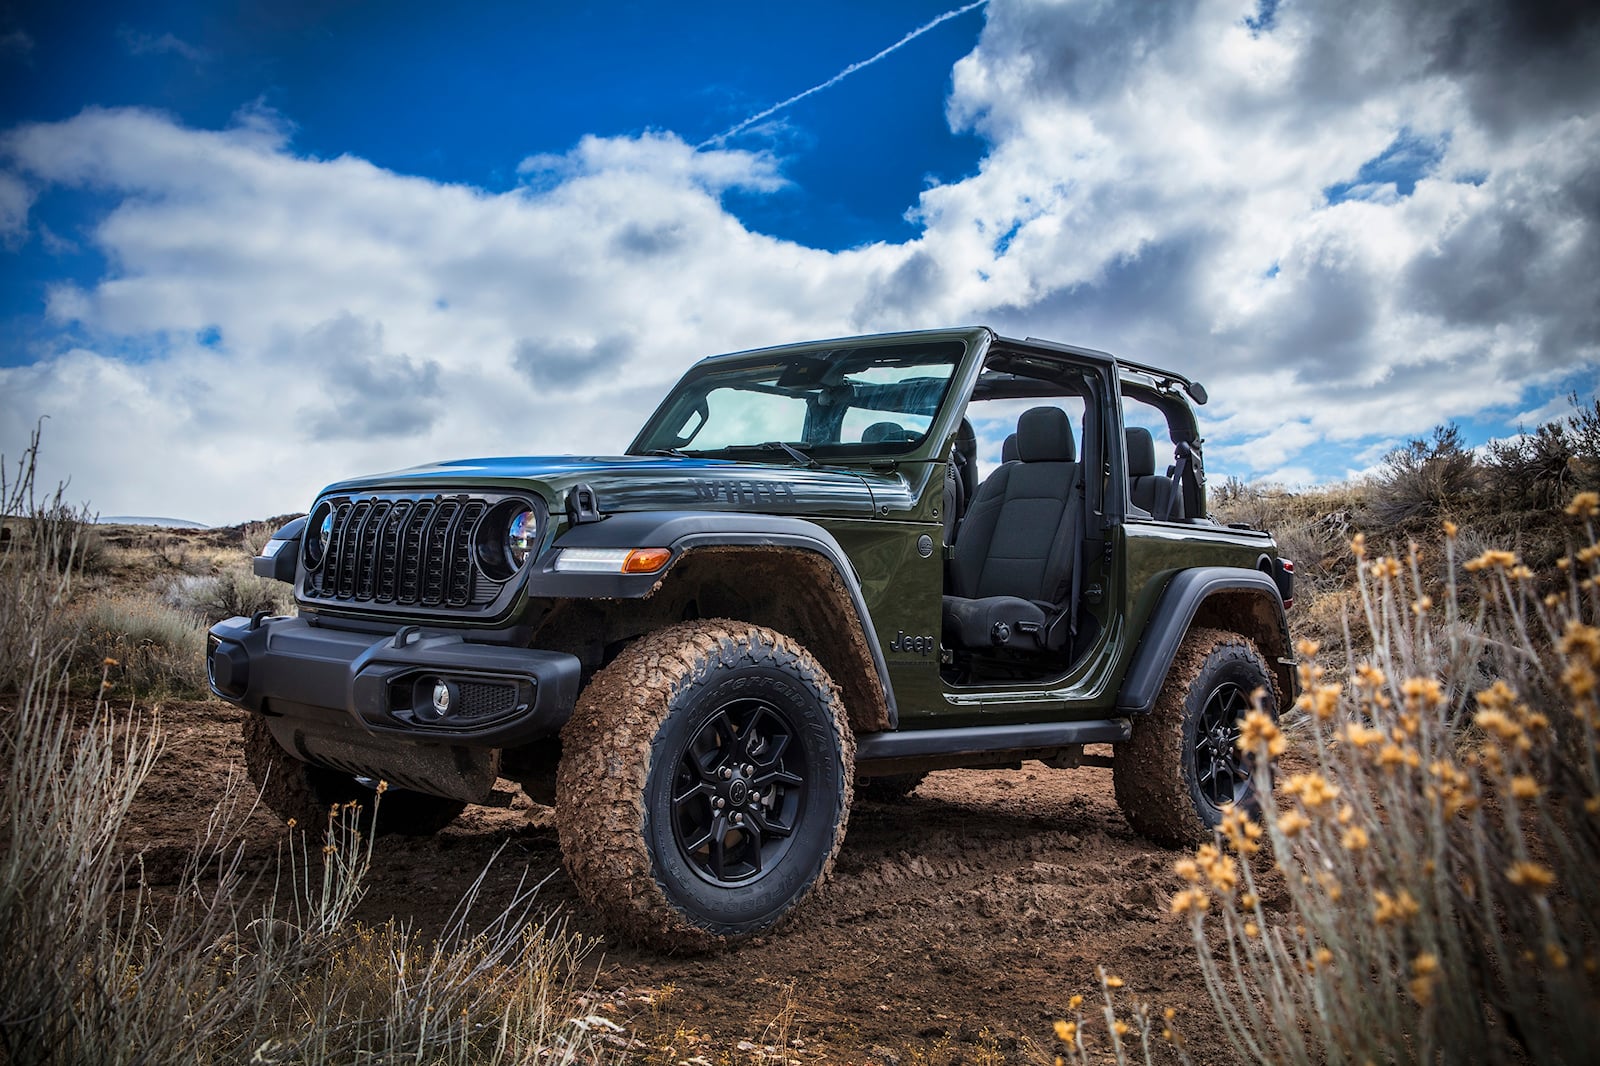 Jeep Wrangler Trim Levels Explained: Which One Is Right For You?